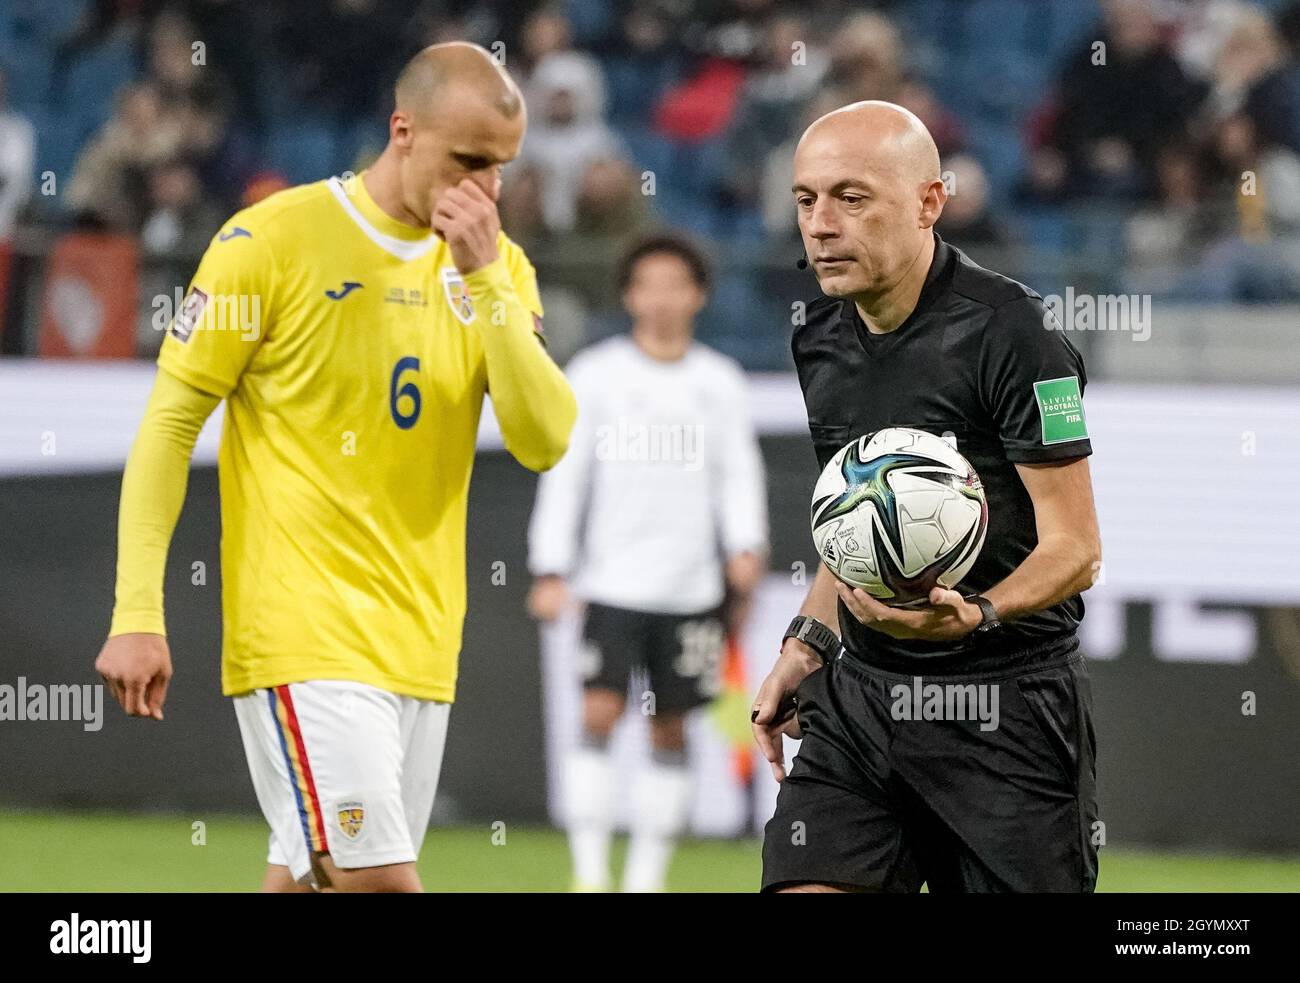 Hamburg, Germany. 08th Oct, 2021. Football: World Cup Qualification Europe, Germany - Romania, Group Stage, Group J, Matchday 7 at Volksparkstadion. Referee Cüneyt Cakir walks across the pitch with the ball in his hand. On the left Romania's Vlad Chiriches. Credit: Axel Heimken/dpa/Alamy Live News Stock Photo